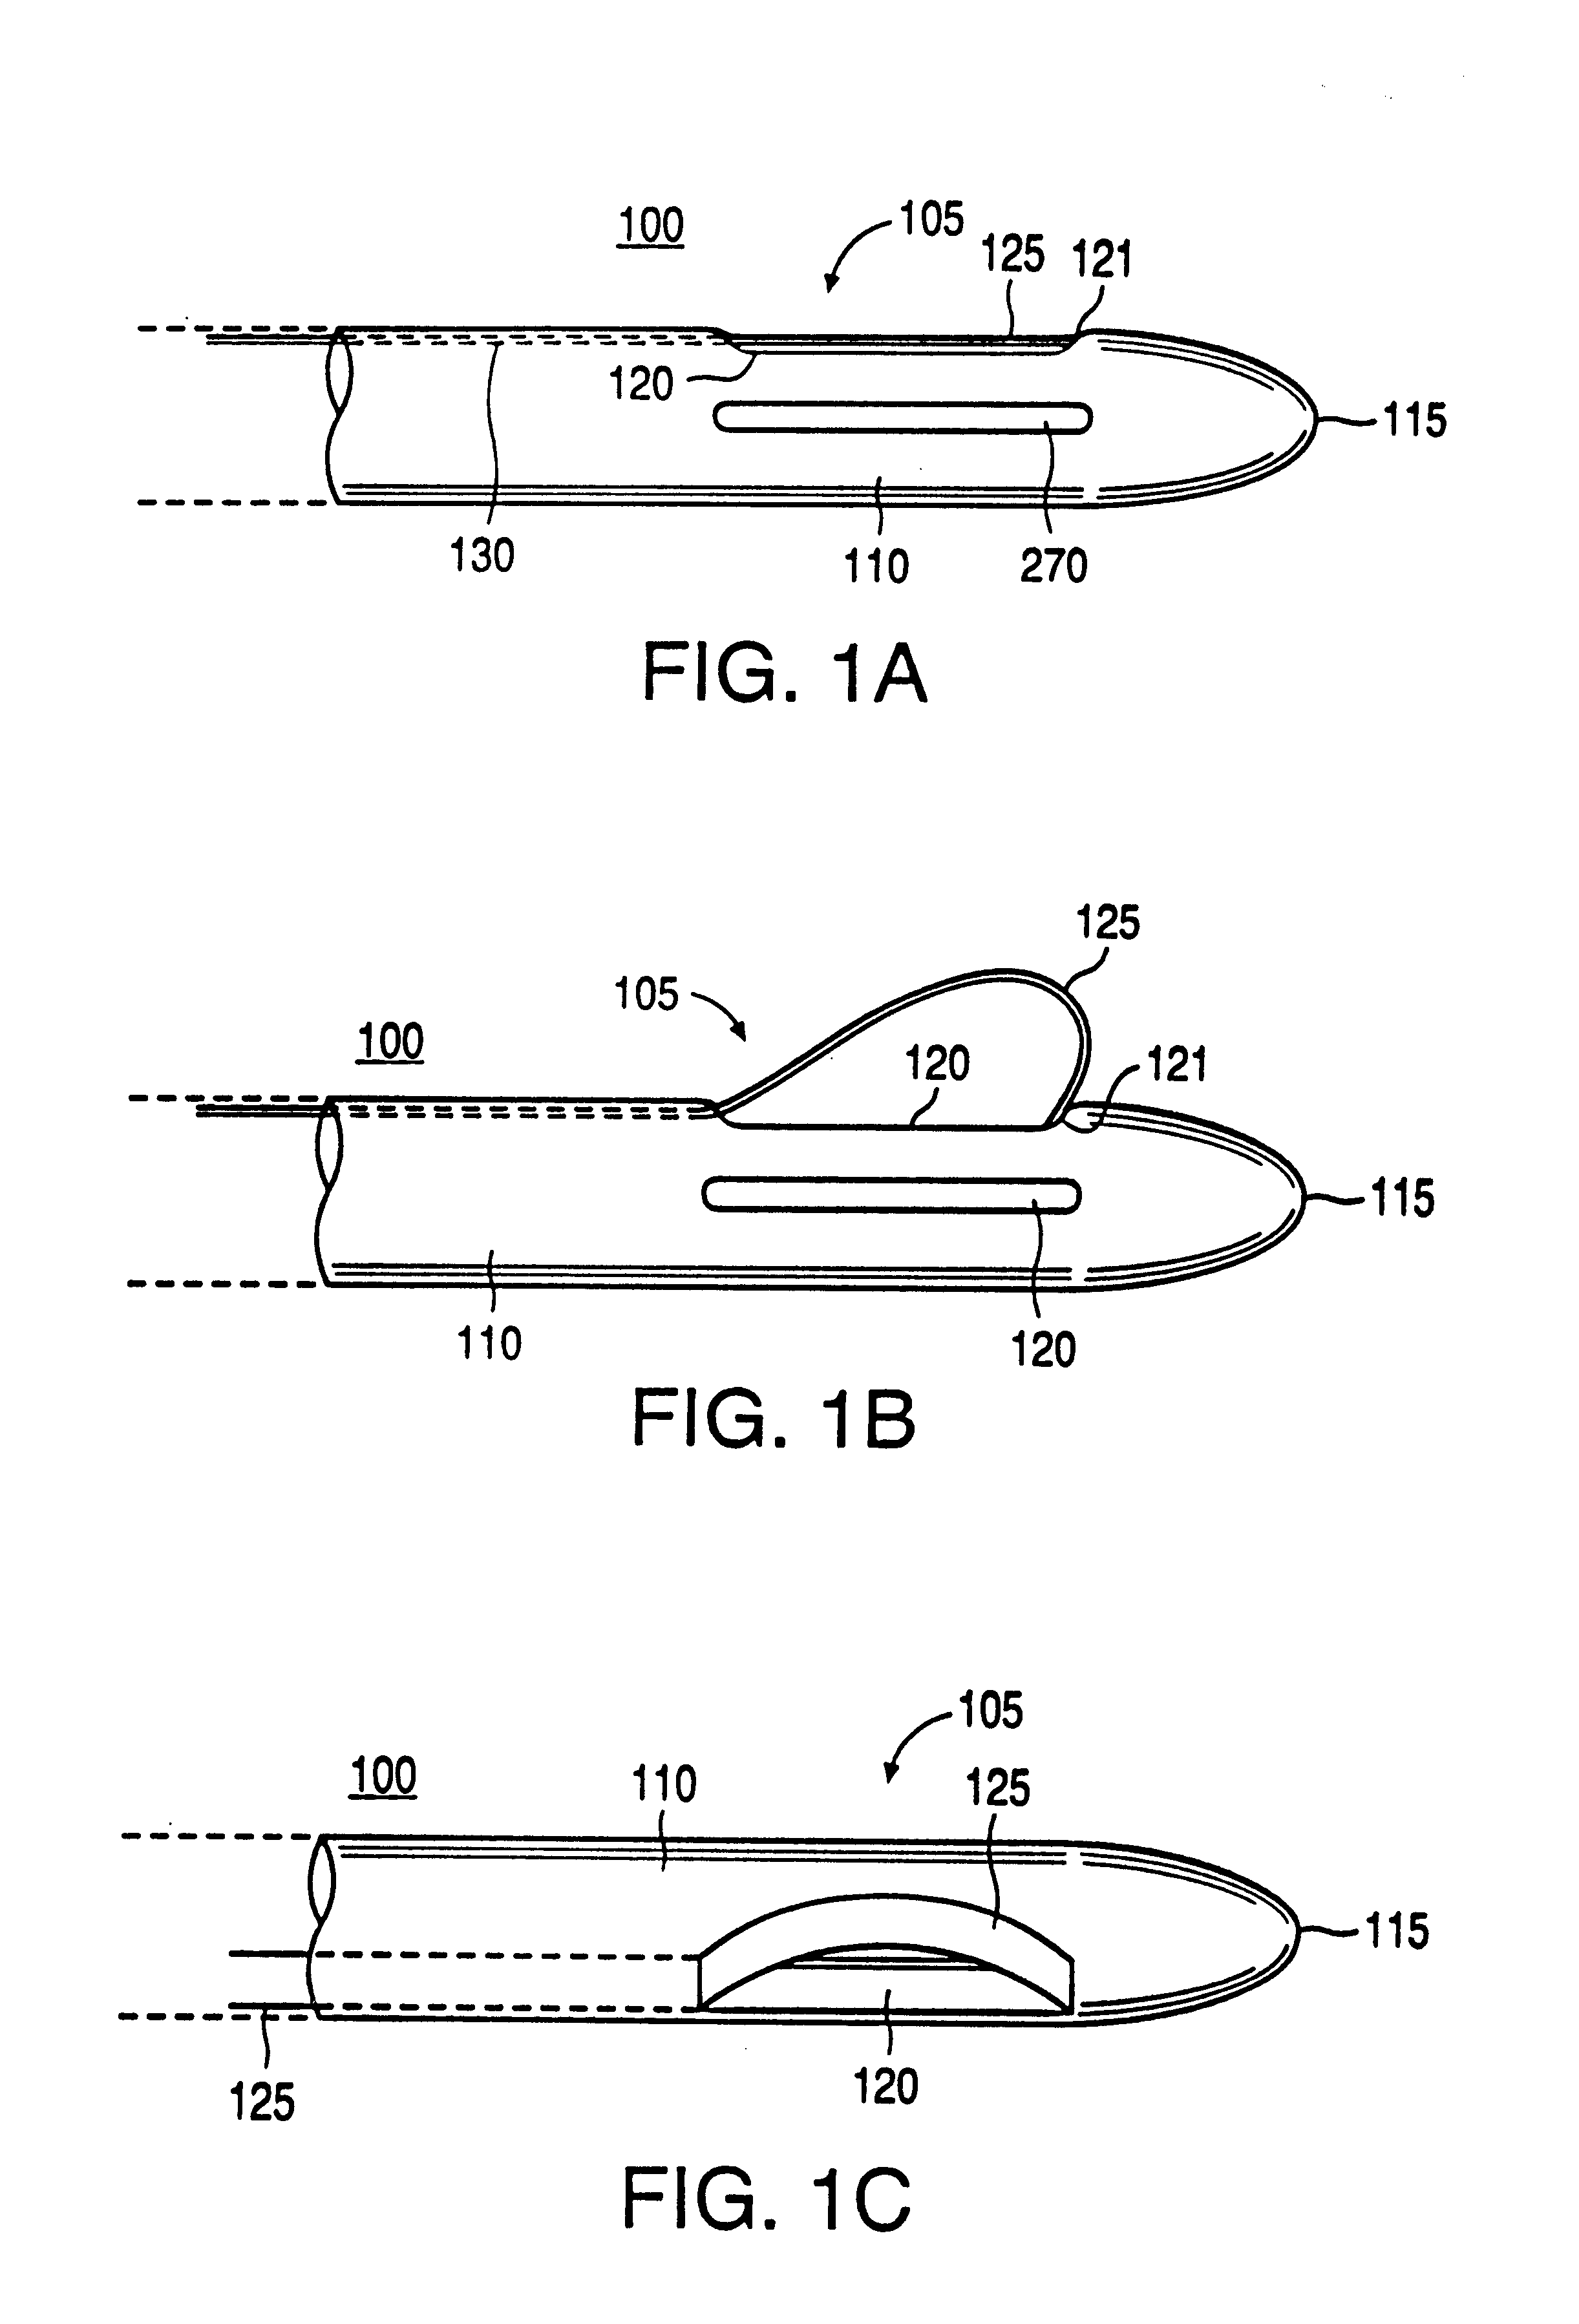 Excisional biopsy device and methods